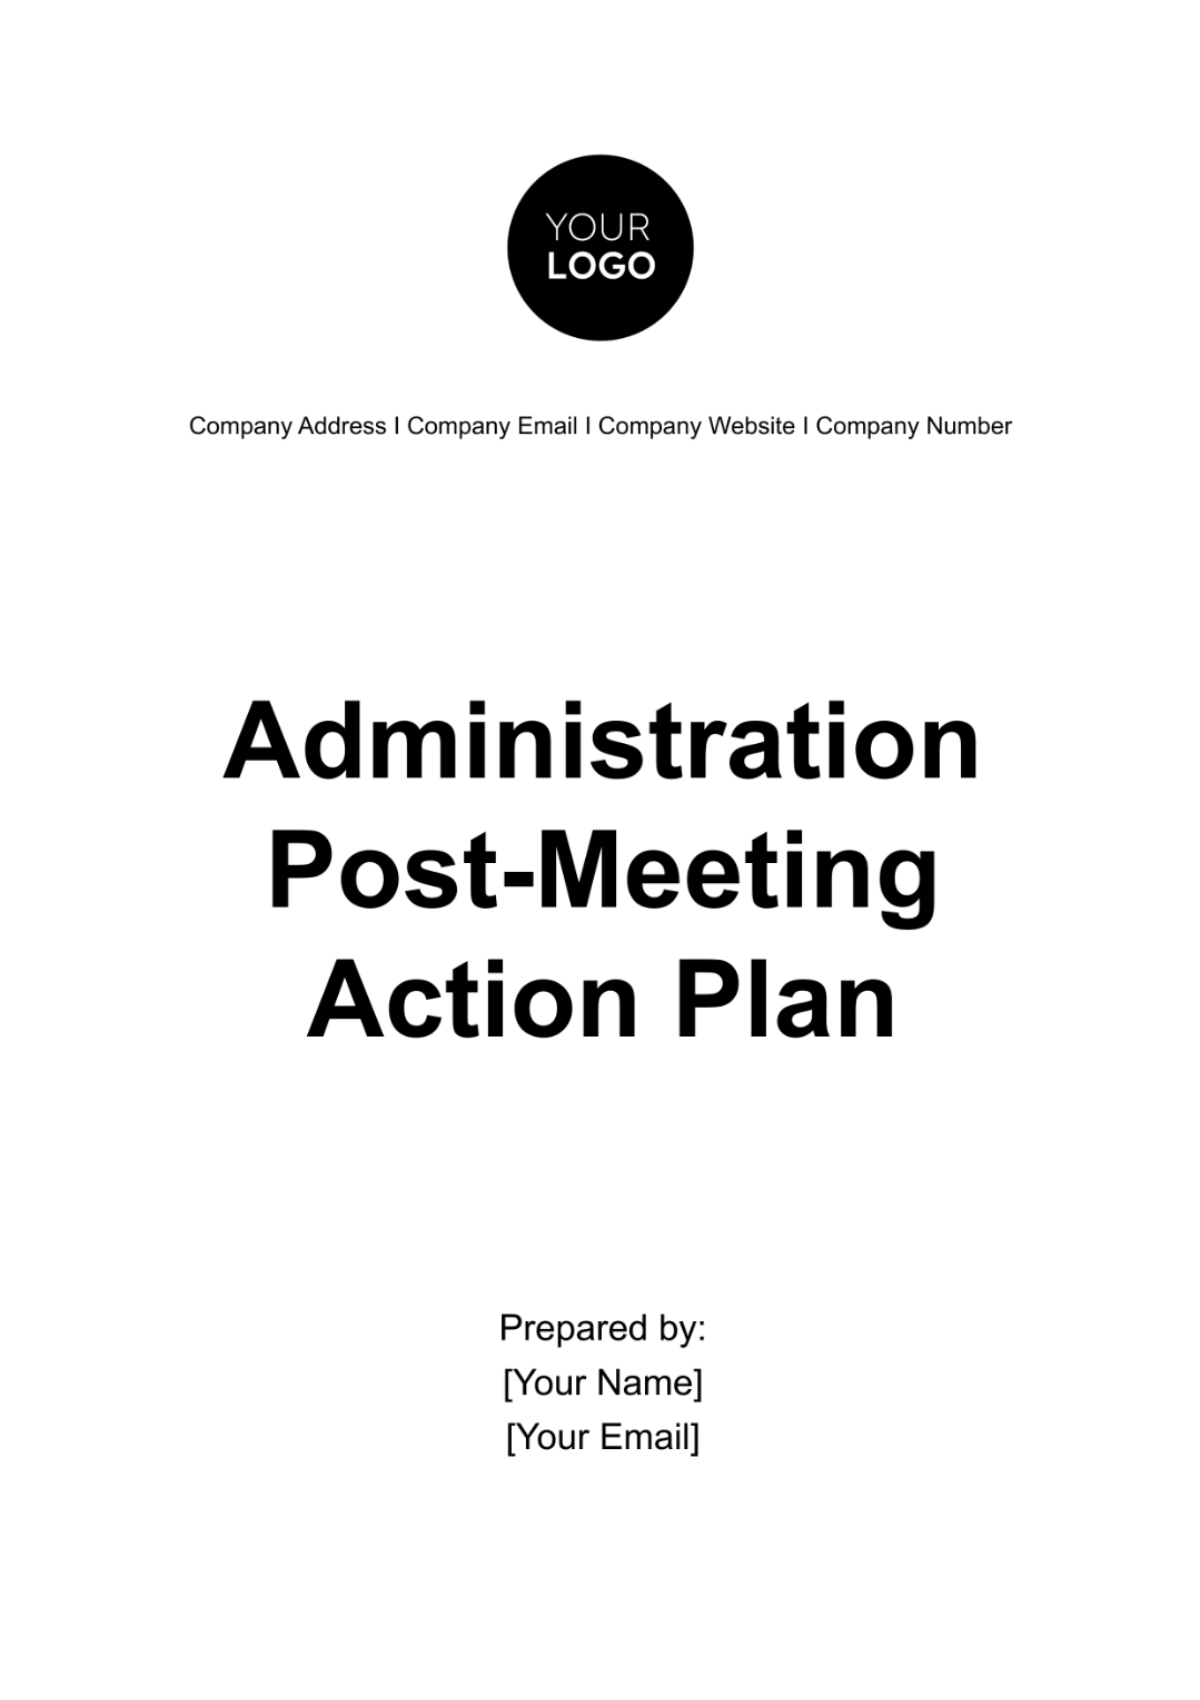 Administration Post-Meeting Action Plan Template